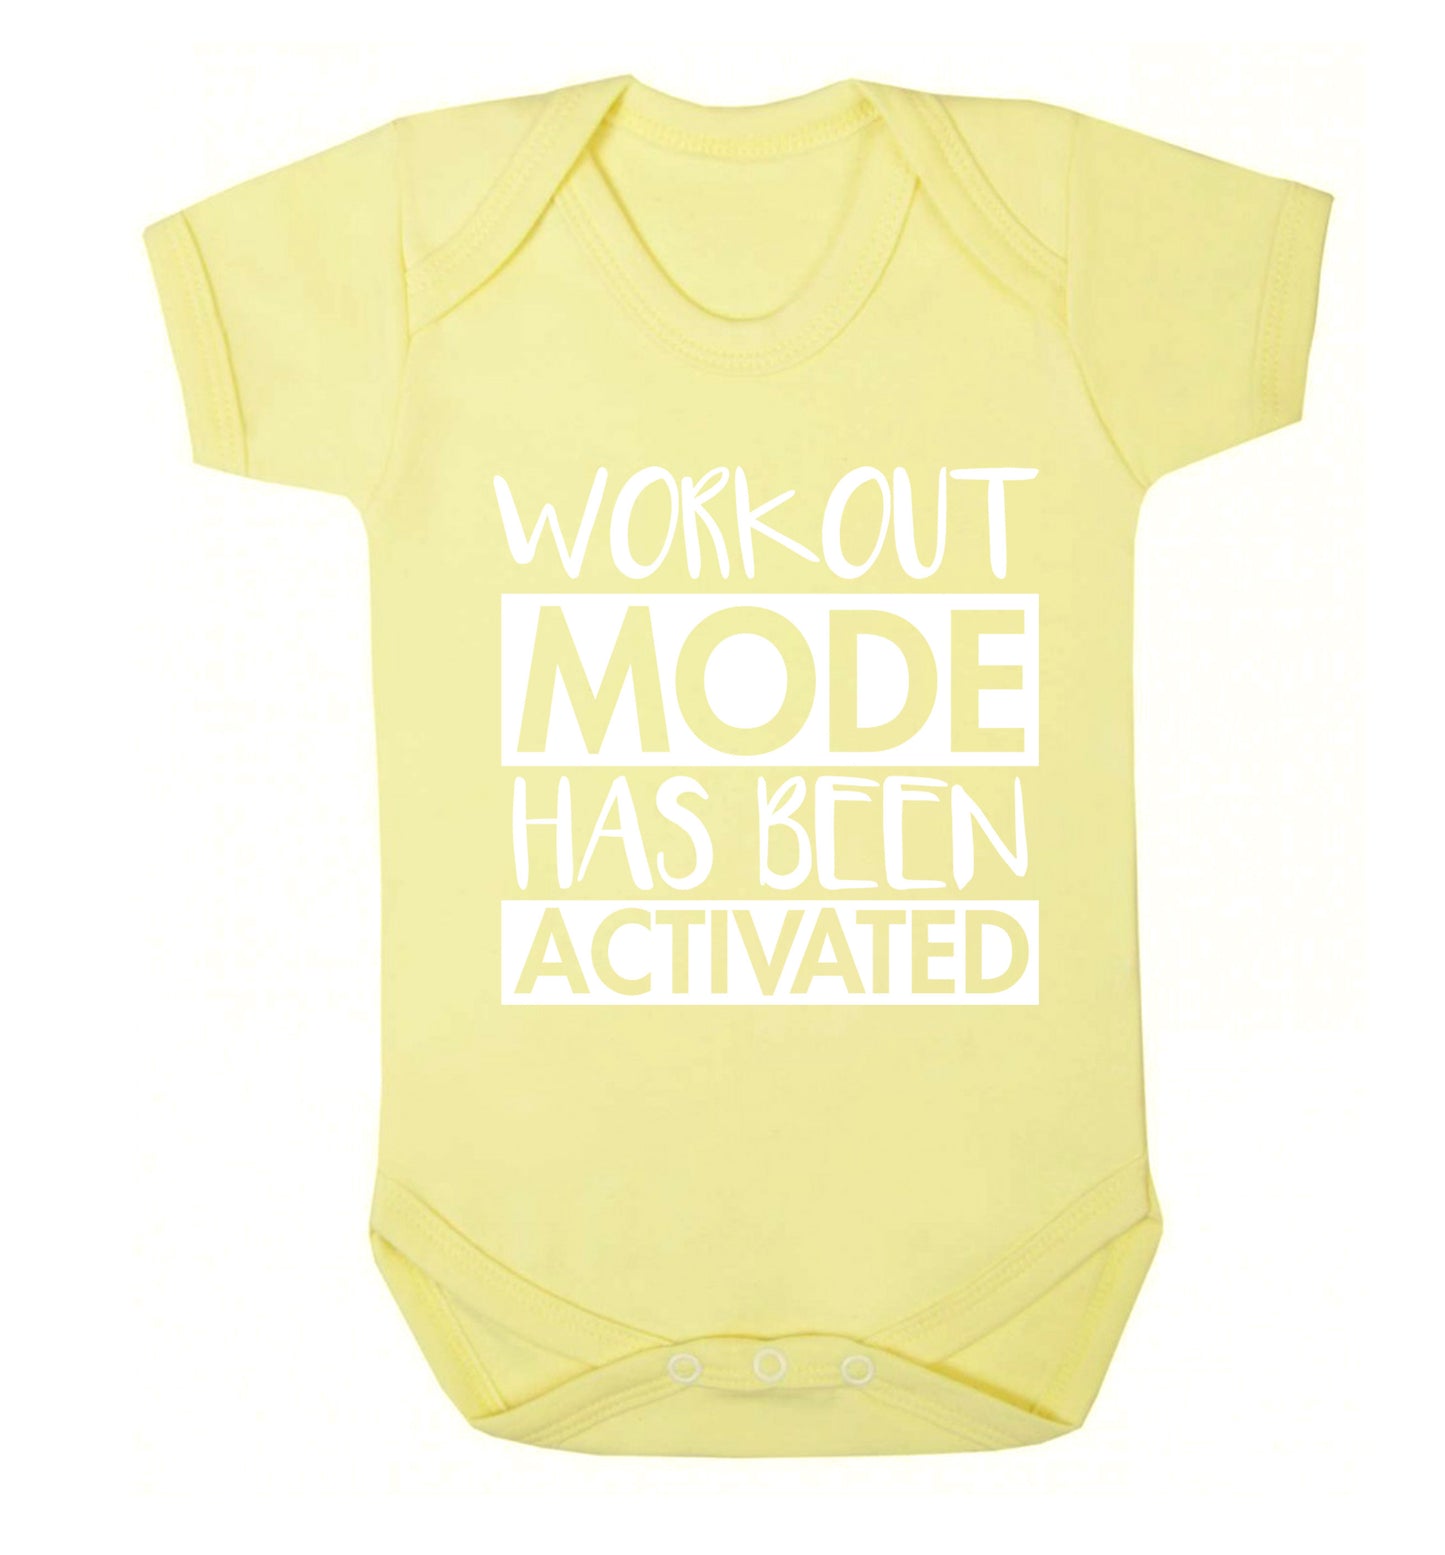 Workout mode has been activated Baby Vest pale yellow 18-24 months